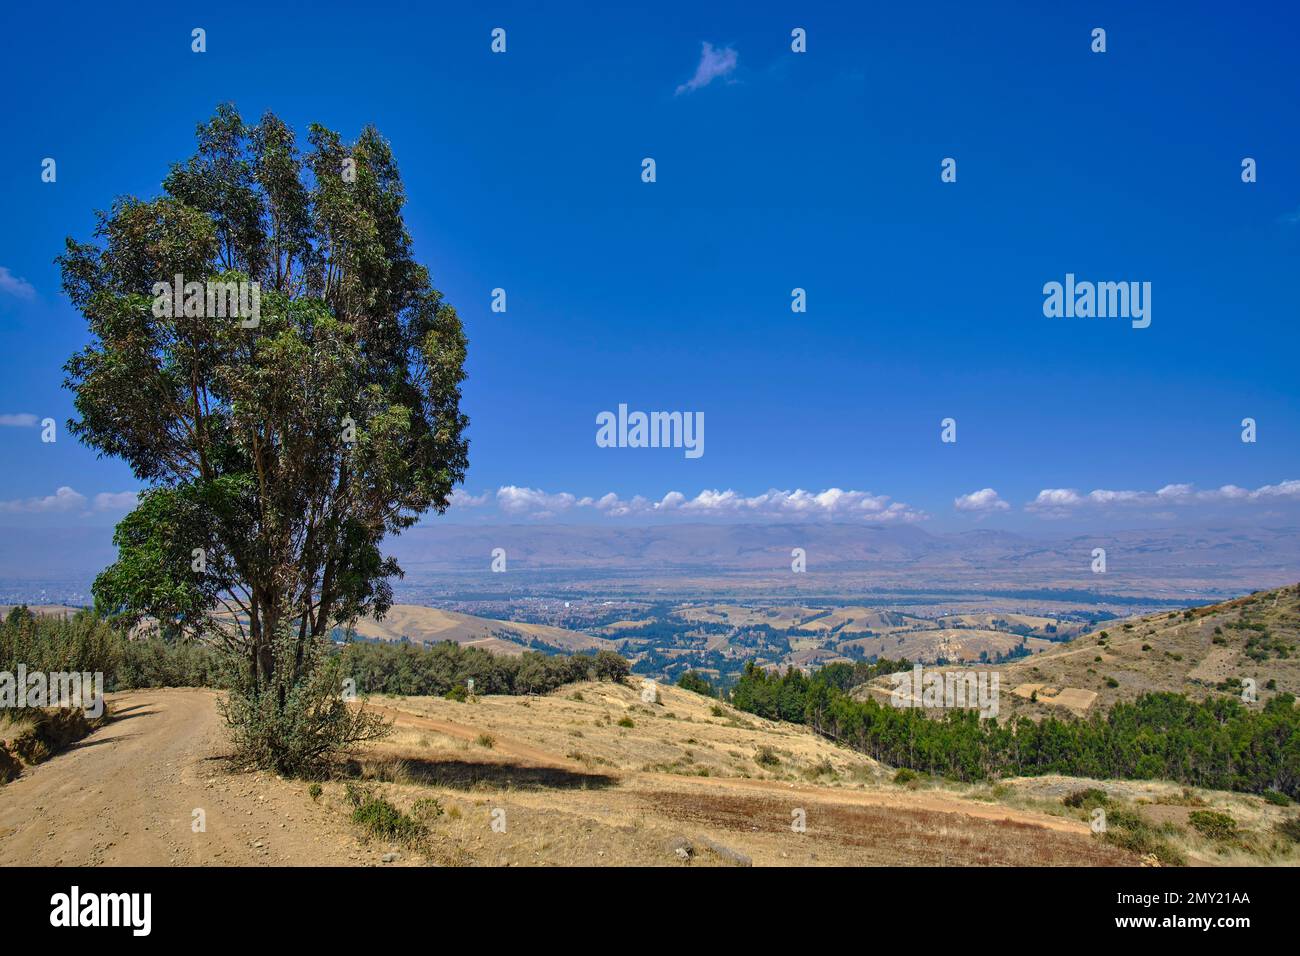 Eucalyptus tree (eucalyptus globulus), lonely tree on the hill with the Andean landscape in the background. Stock Photo